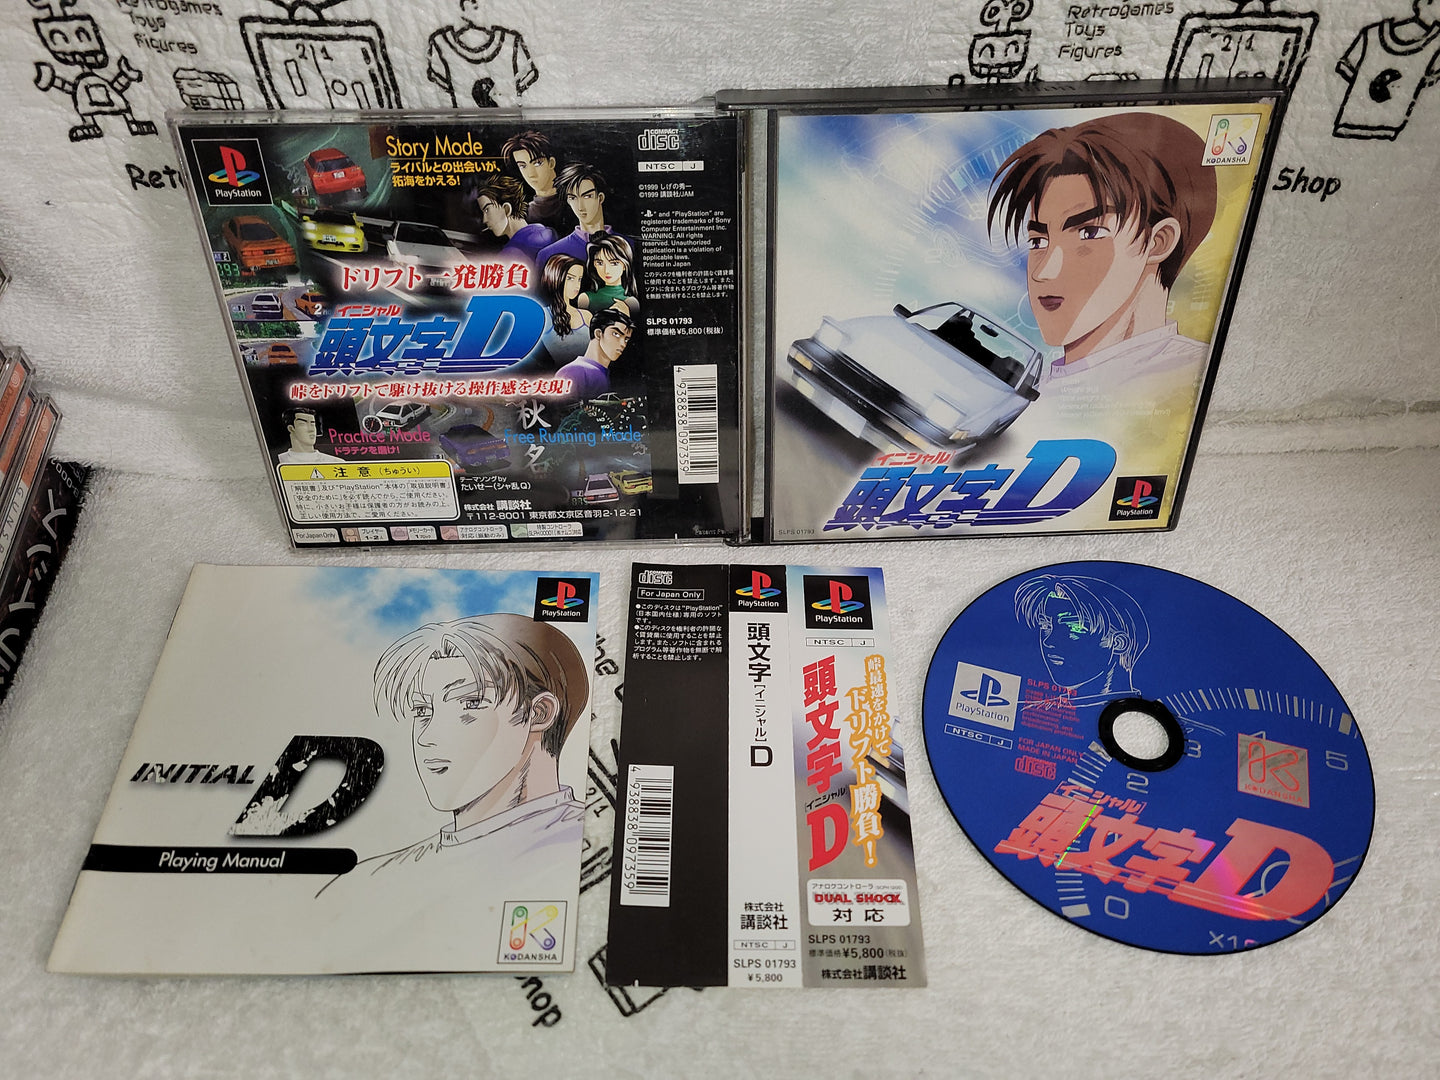 manuel reserved - Initial D - sony playstation ps1 japan